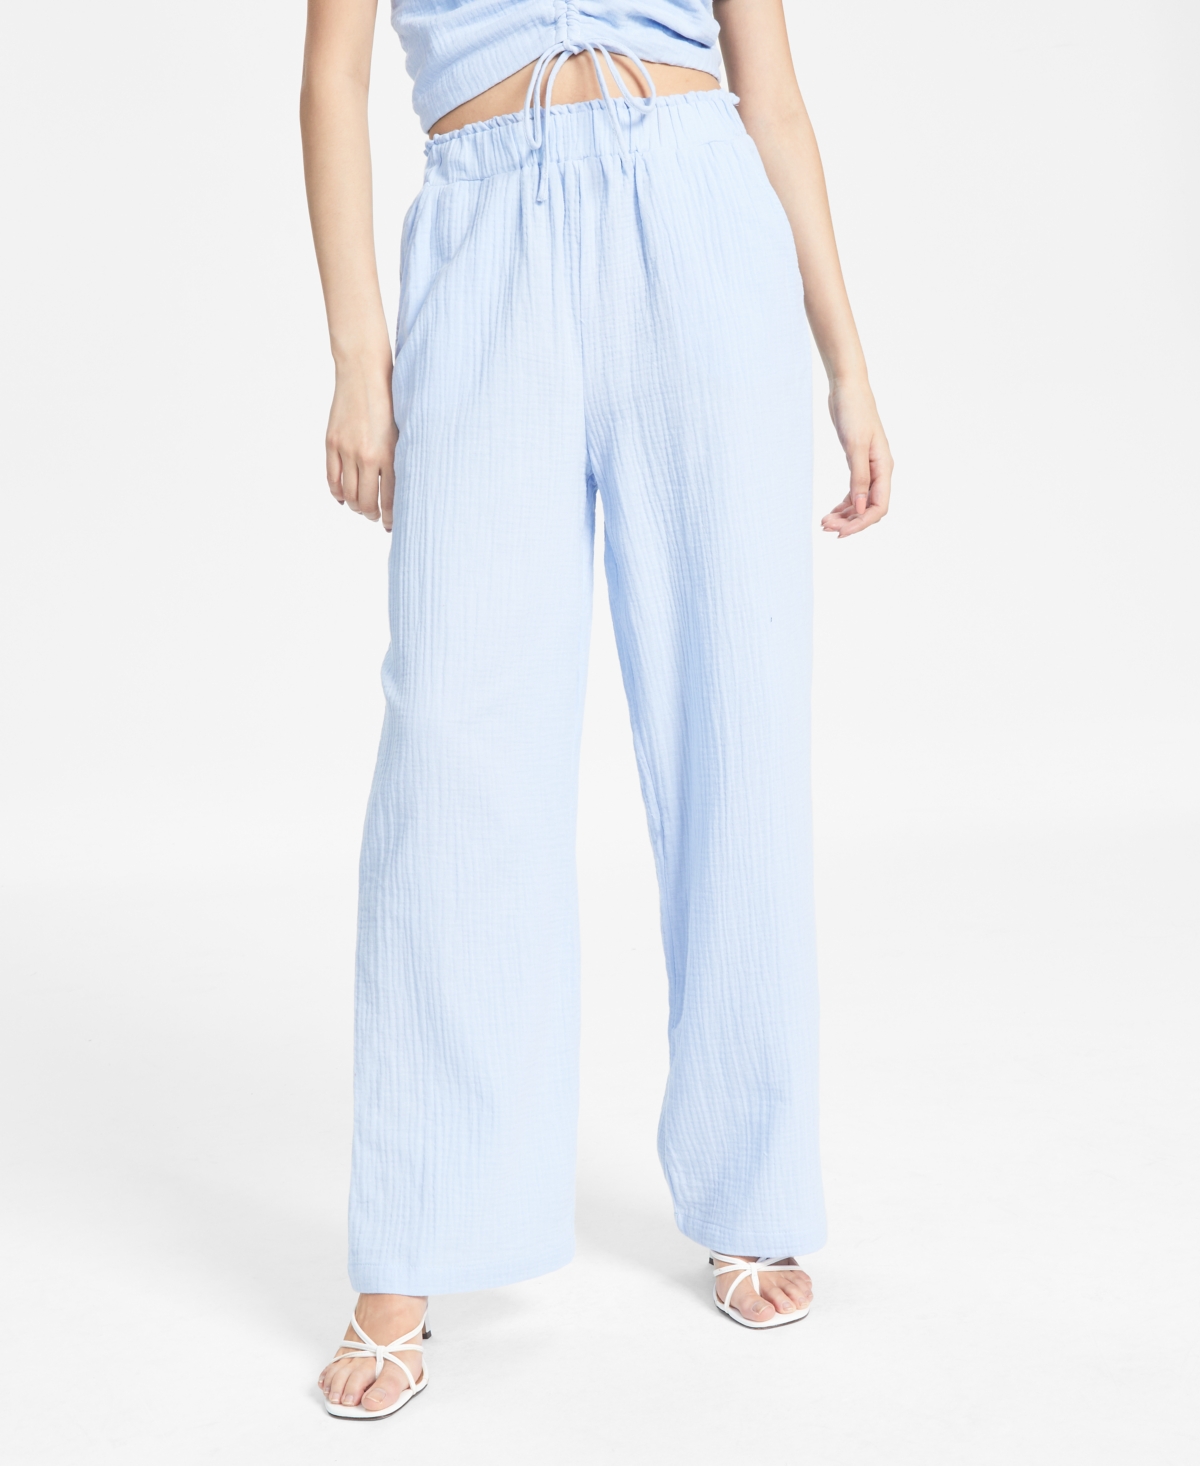  And Now This Women's Textured High-Rise Pull-On Pants